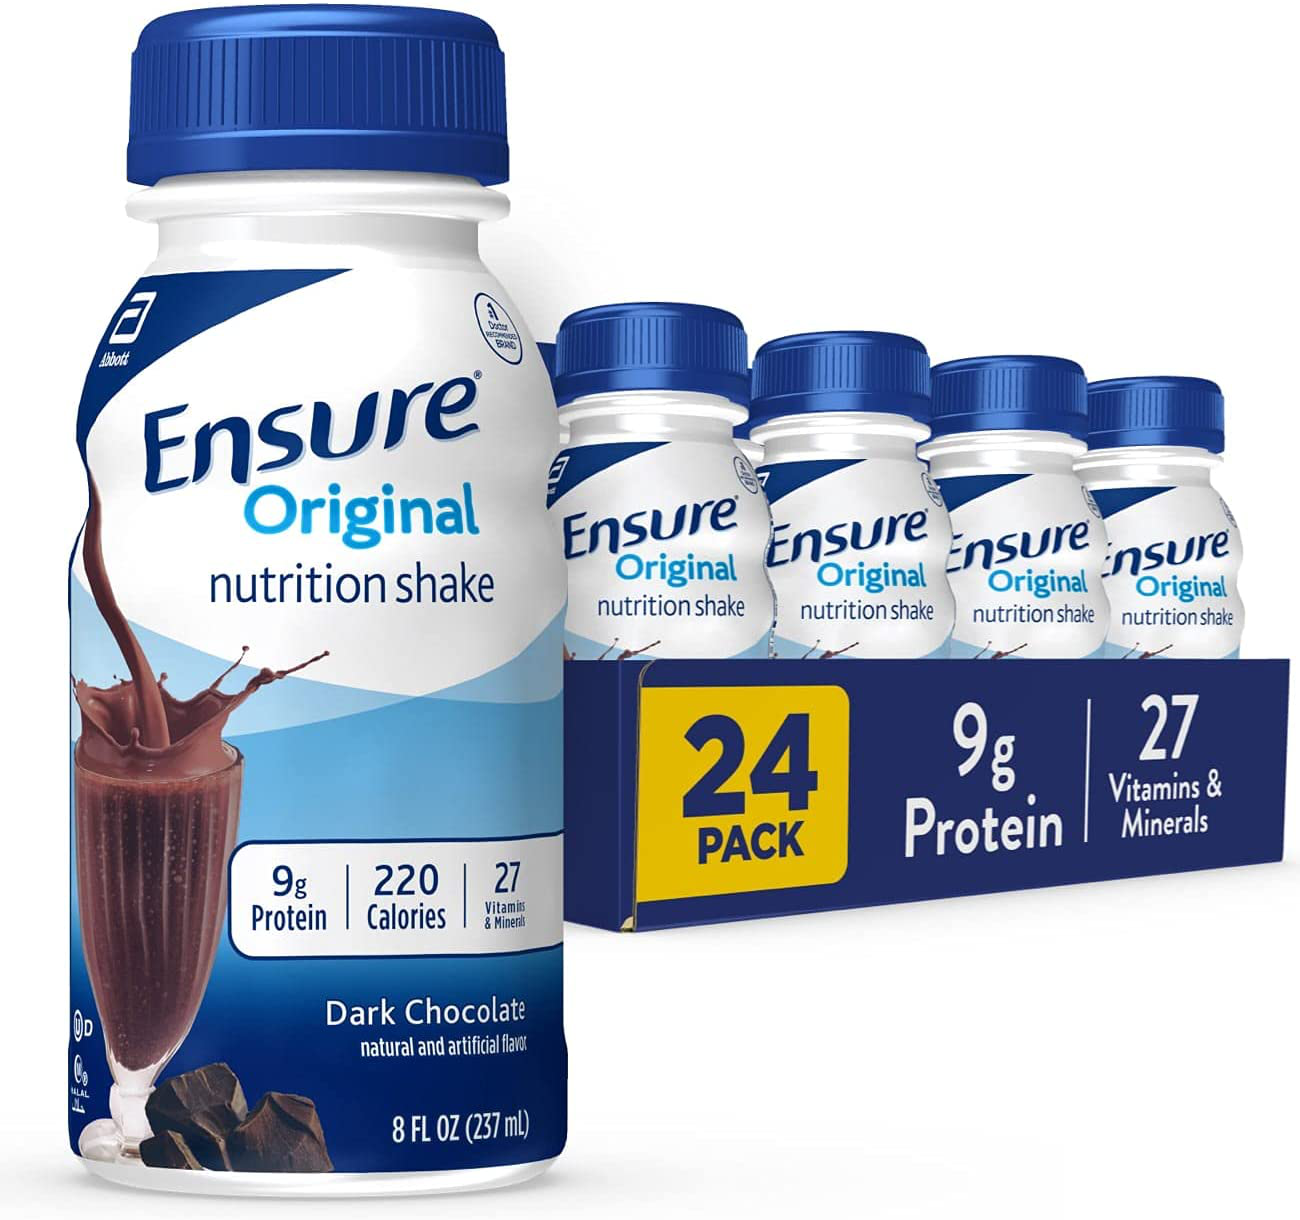 Ensure Original Nutrition Shake, Small Meal Replacement Shake, Complete, Balanced Nutrition with Nutrients to Support Immune System Health